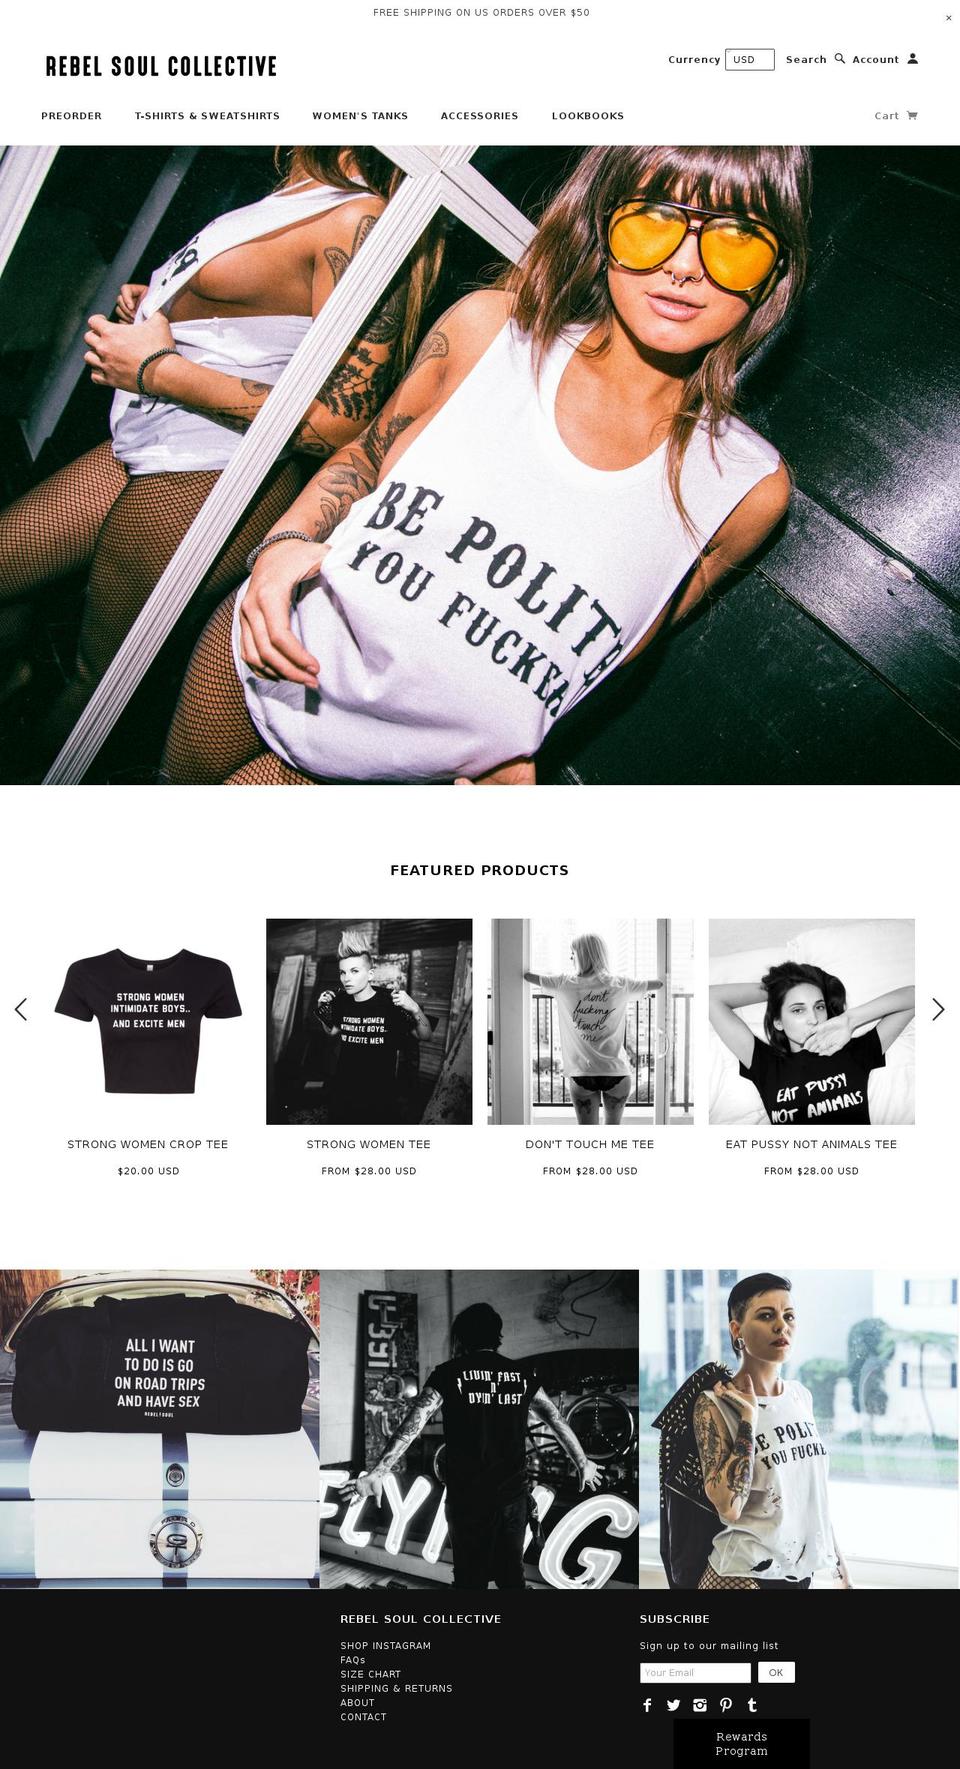 Influence Shopify theme site example rebelsoulco.com